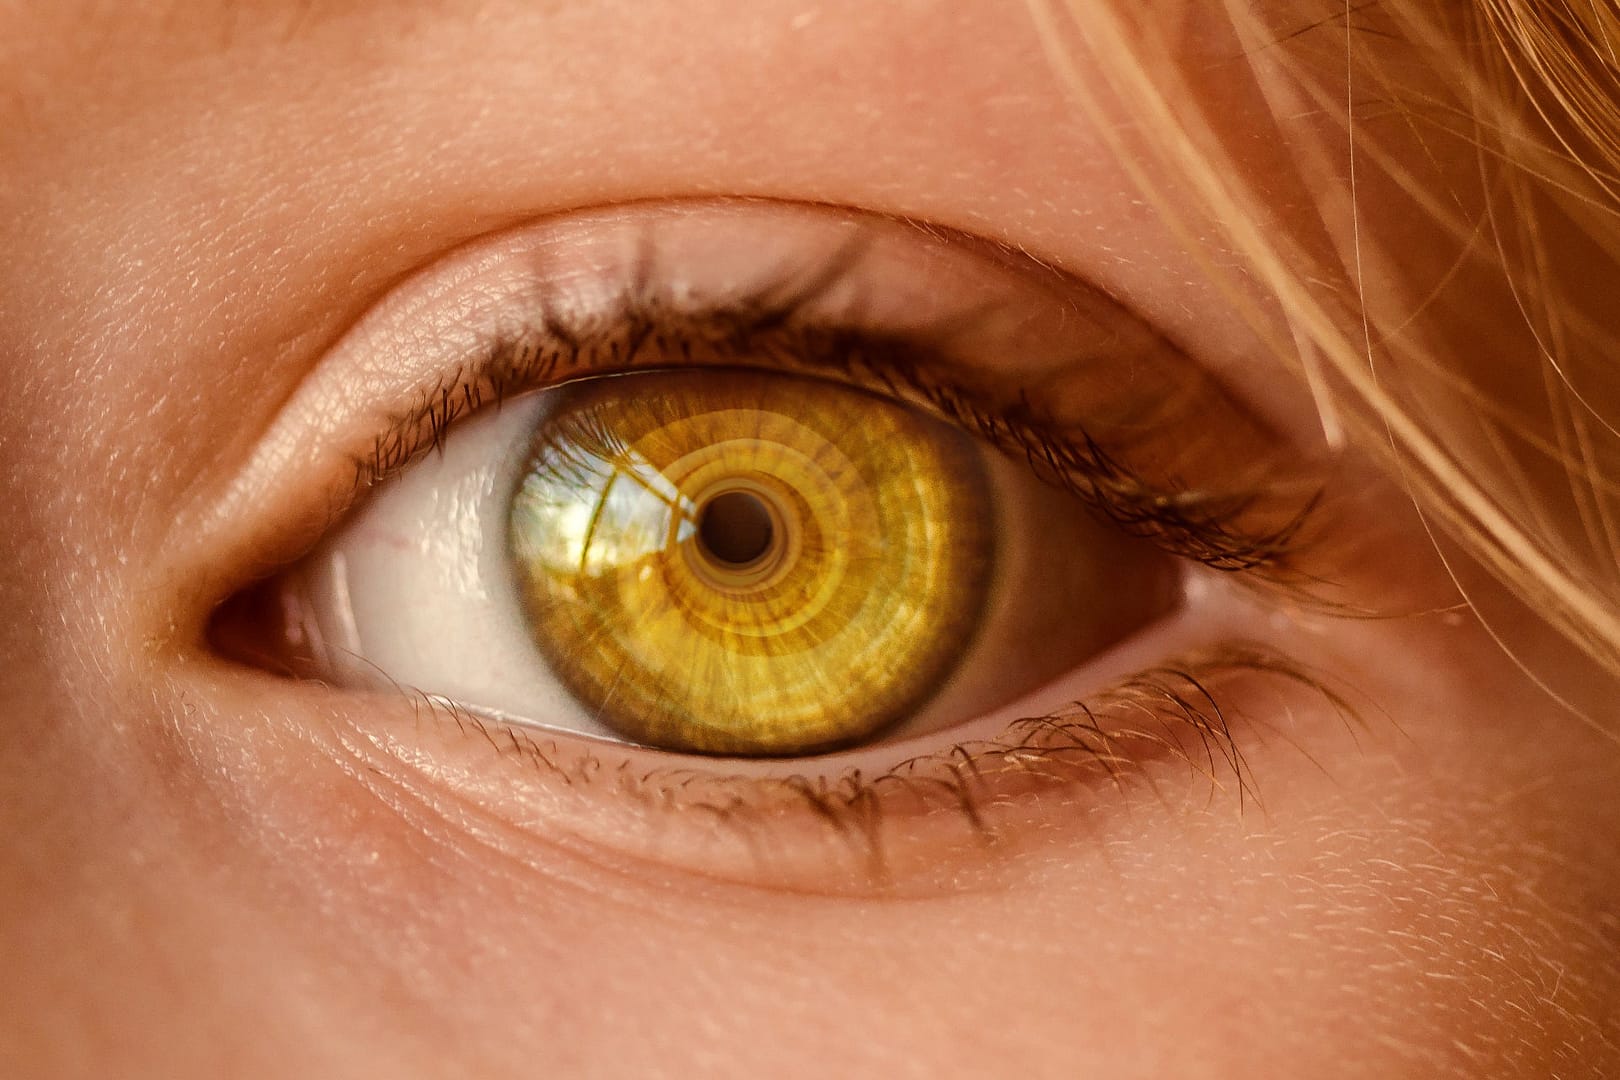 Close-up of the eye of a person, a spiral reflected in their yellow iris